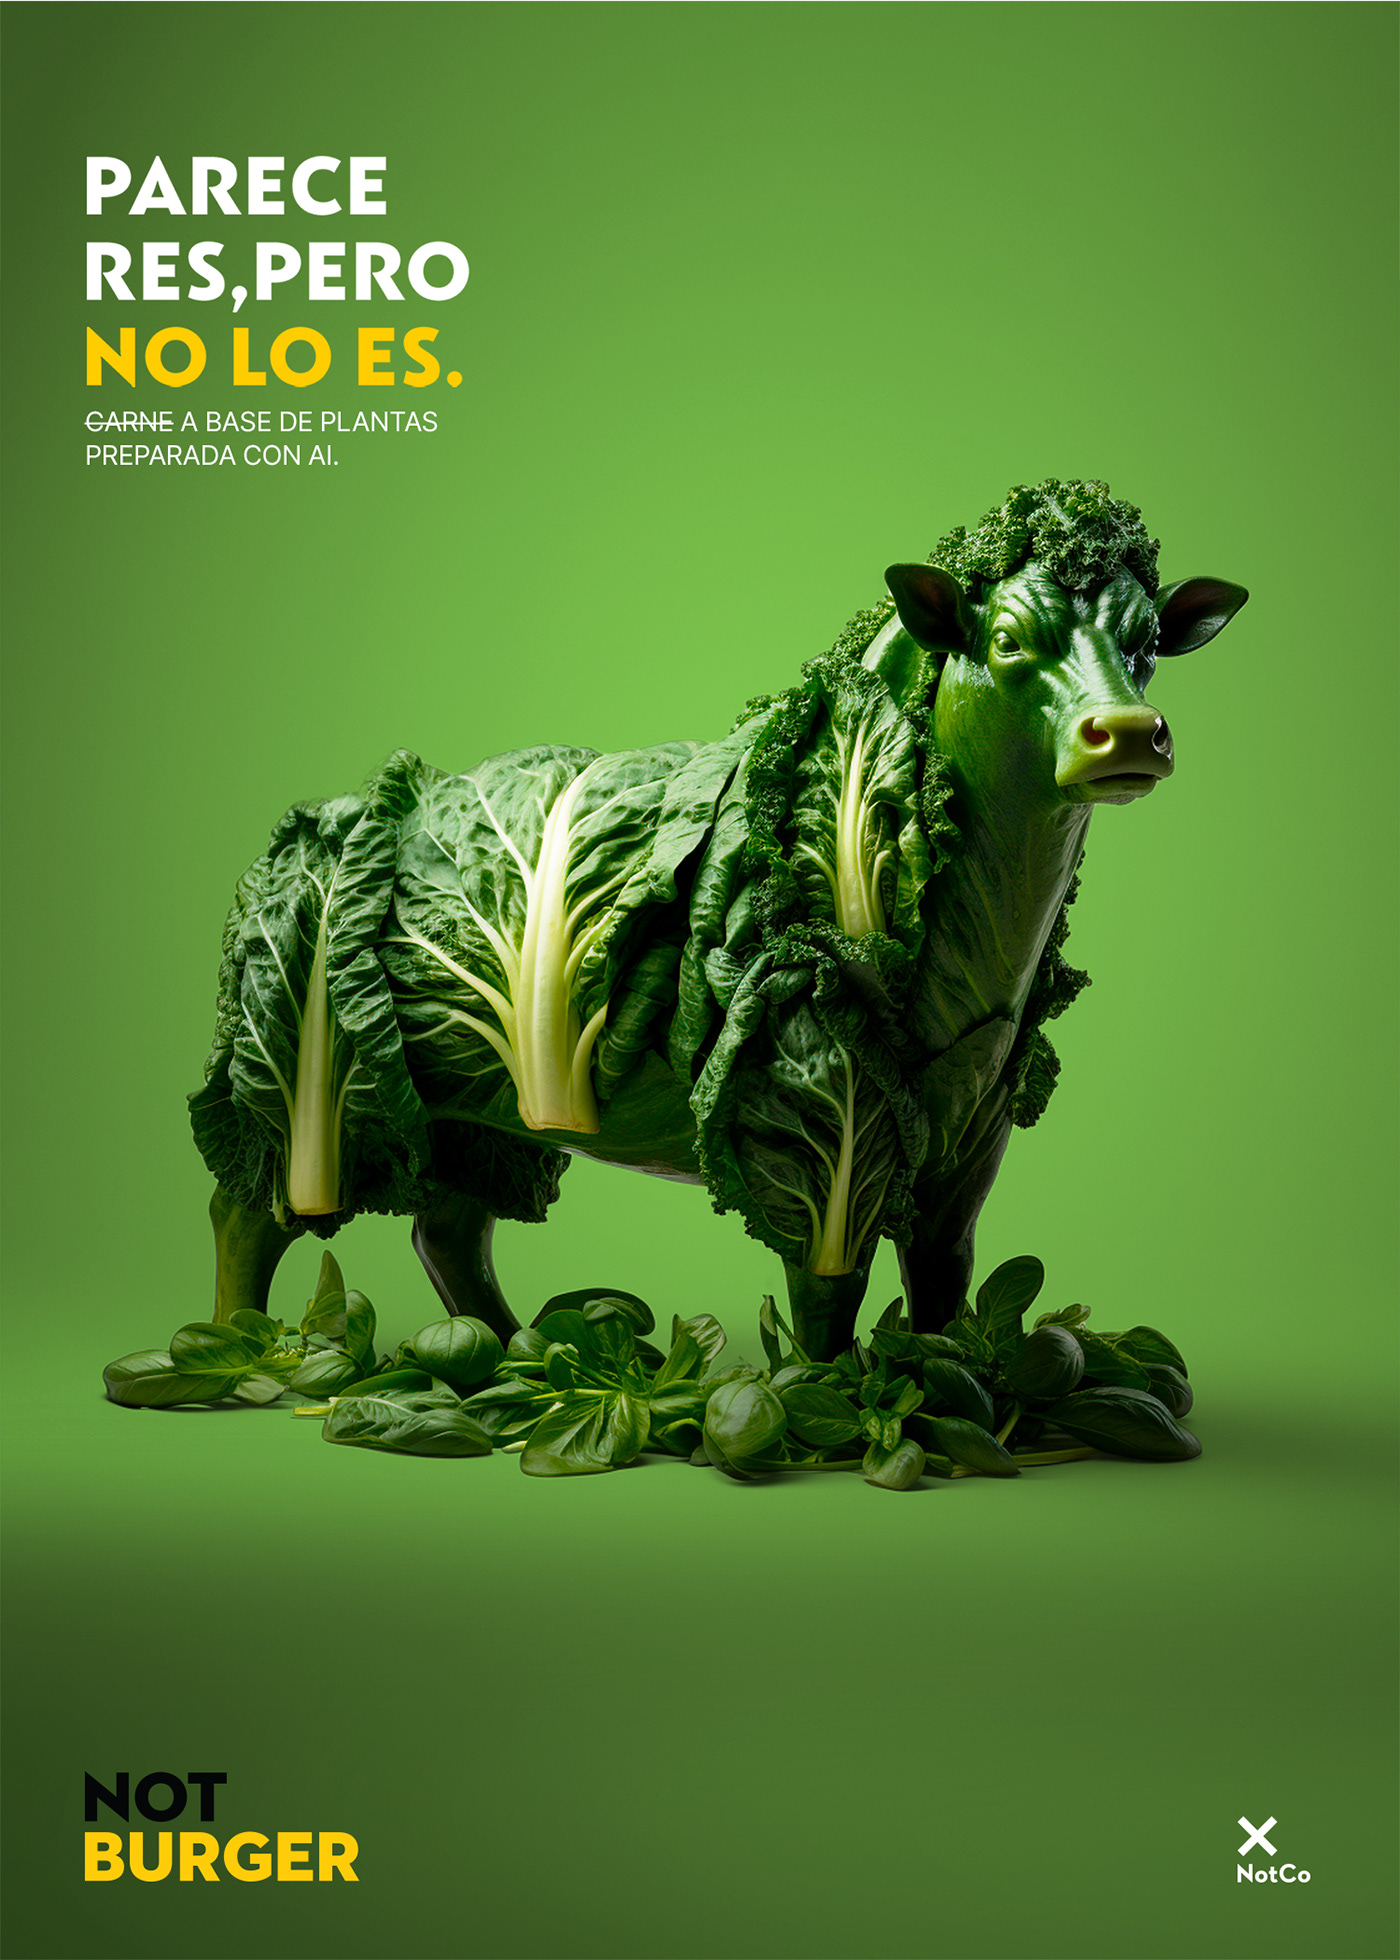 advertising poster for the company NotCo, product advertising campaign, Notco buger.